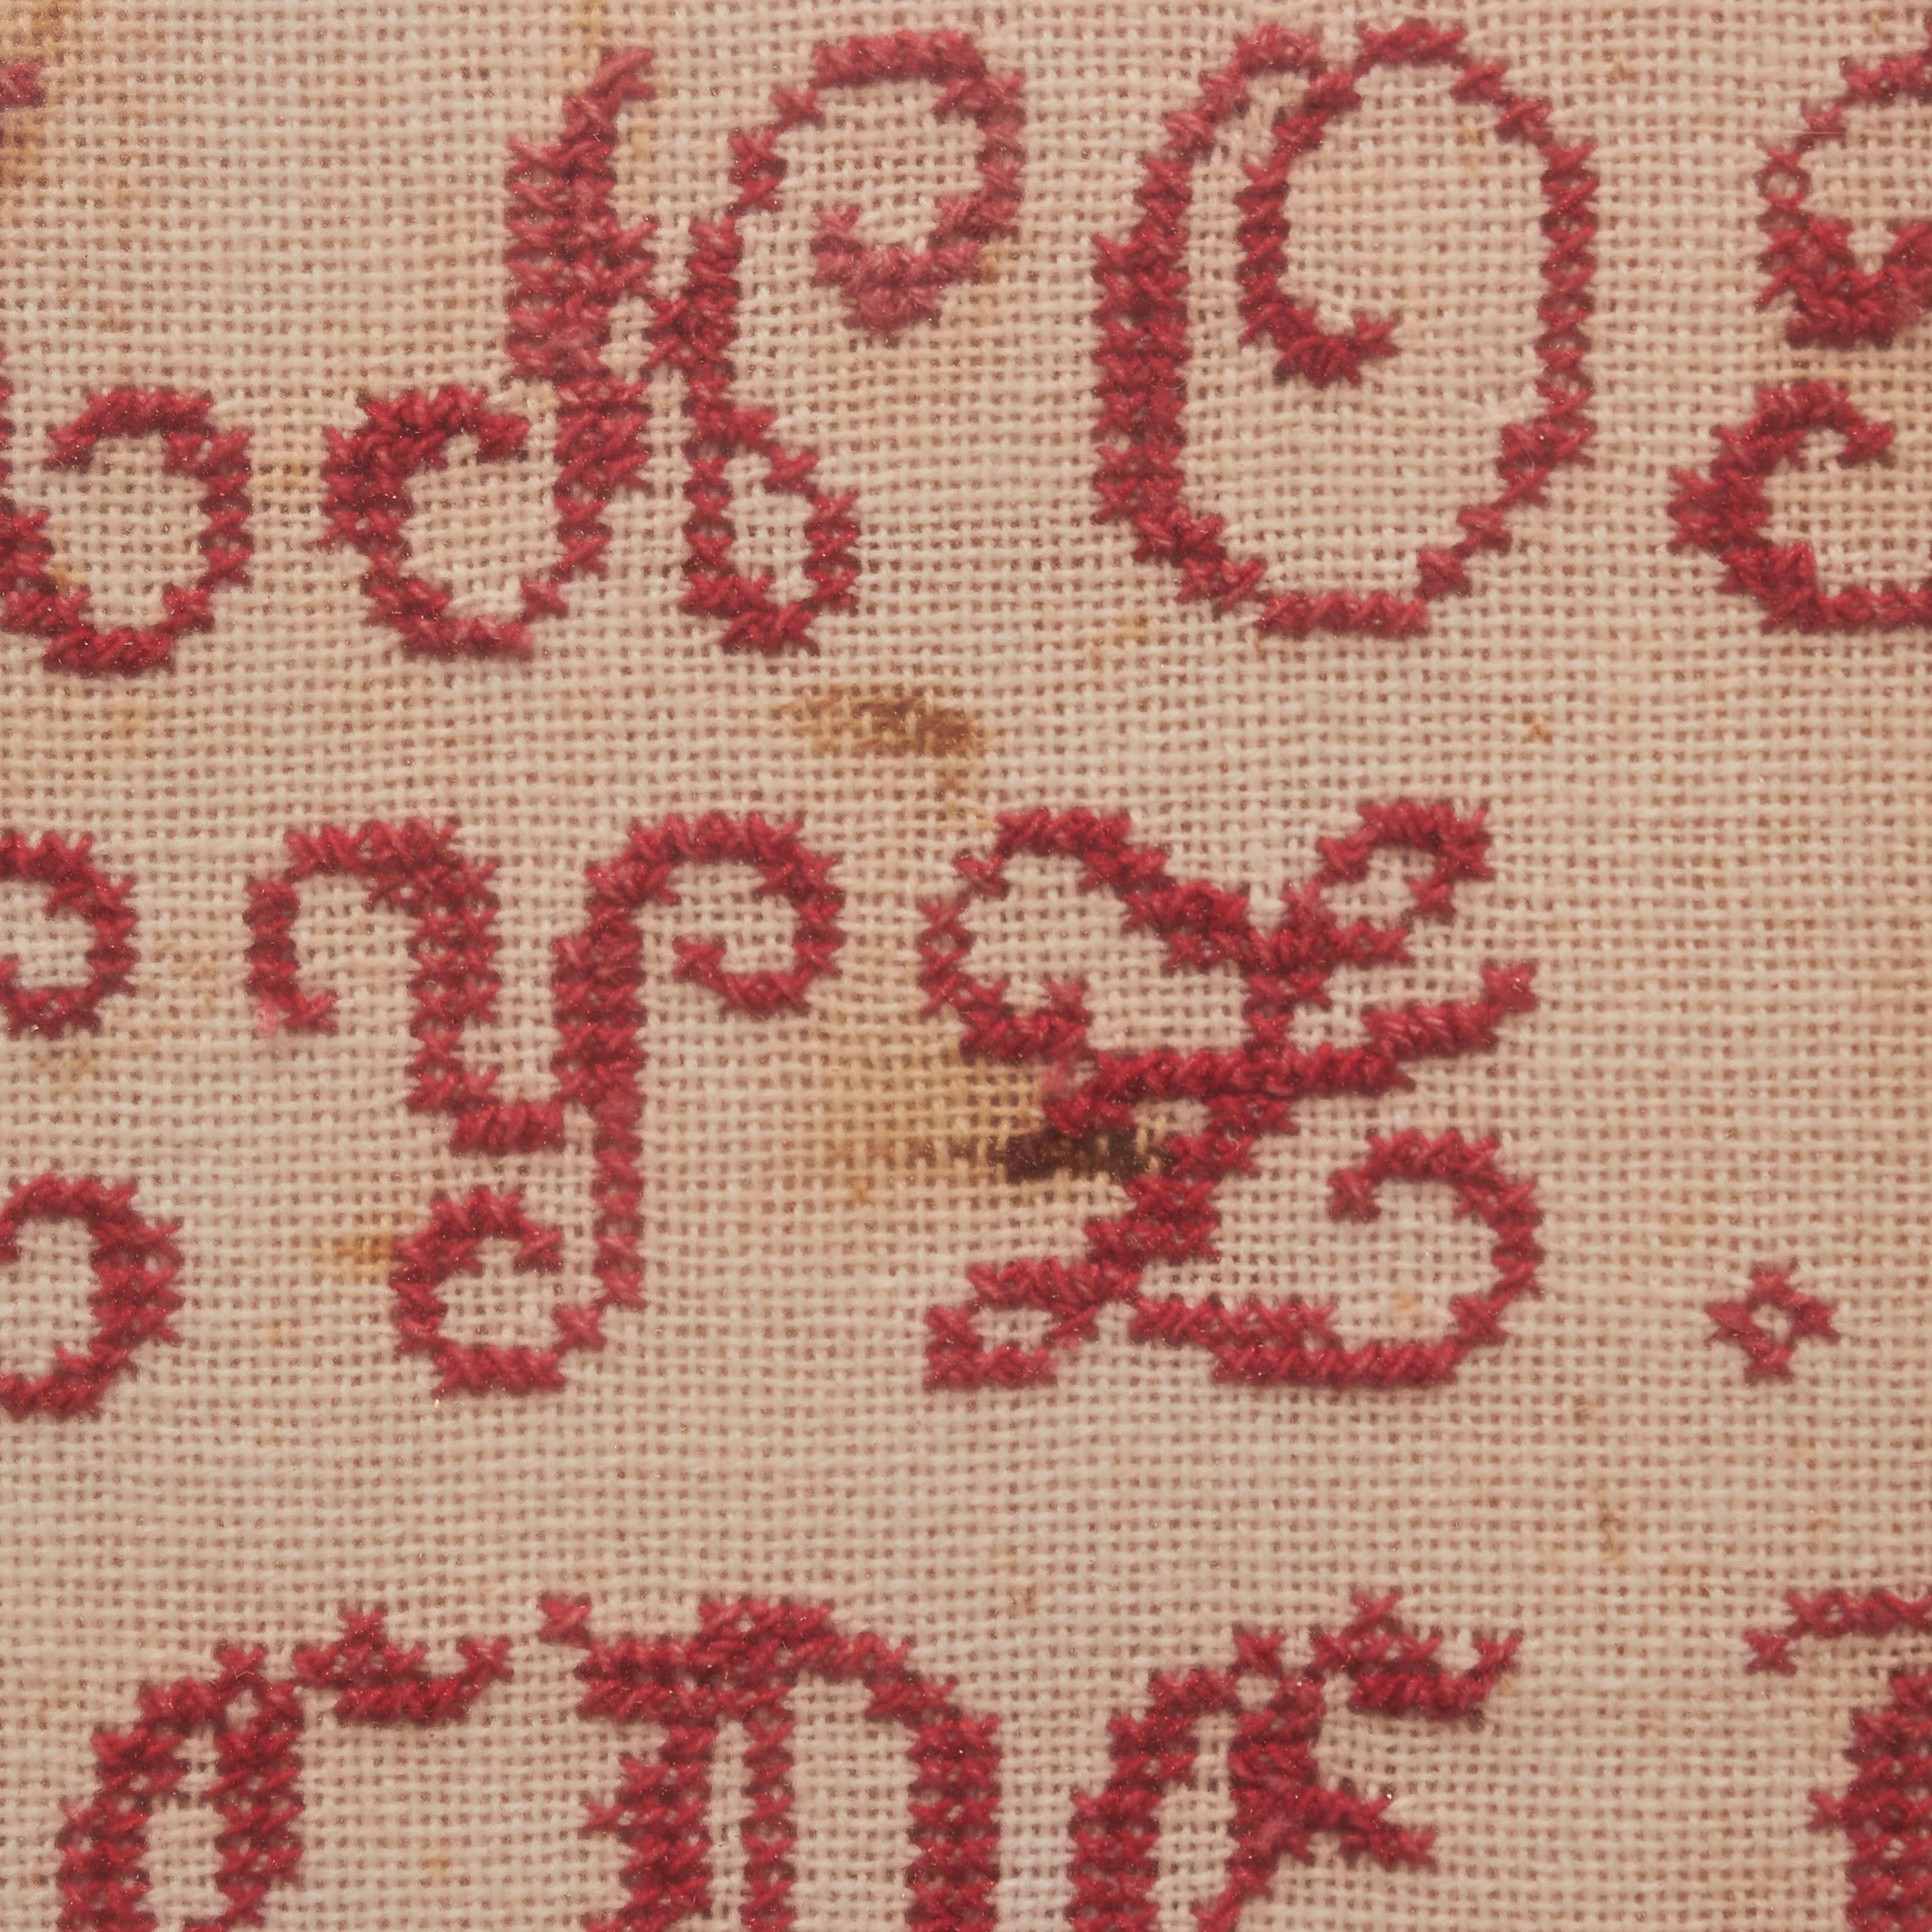 Elegant Nostalgia: Vintage 20th Century Cross-Stitch Sampler - Red on White In Fair Condition For Sale In Barcelona, ES